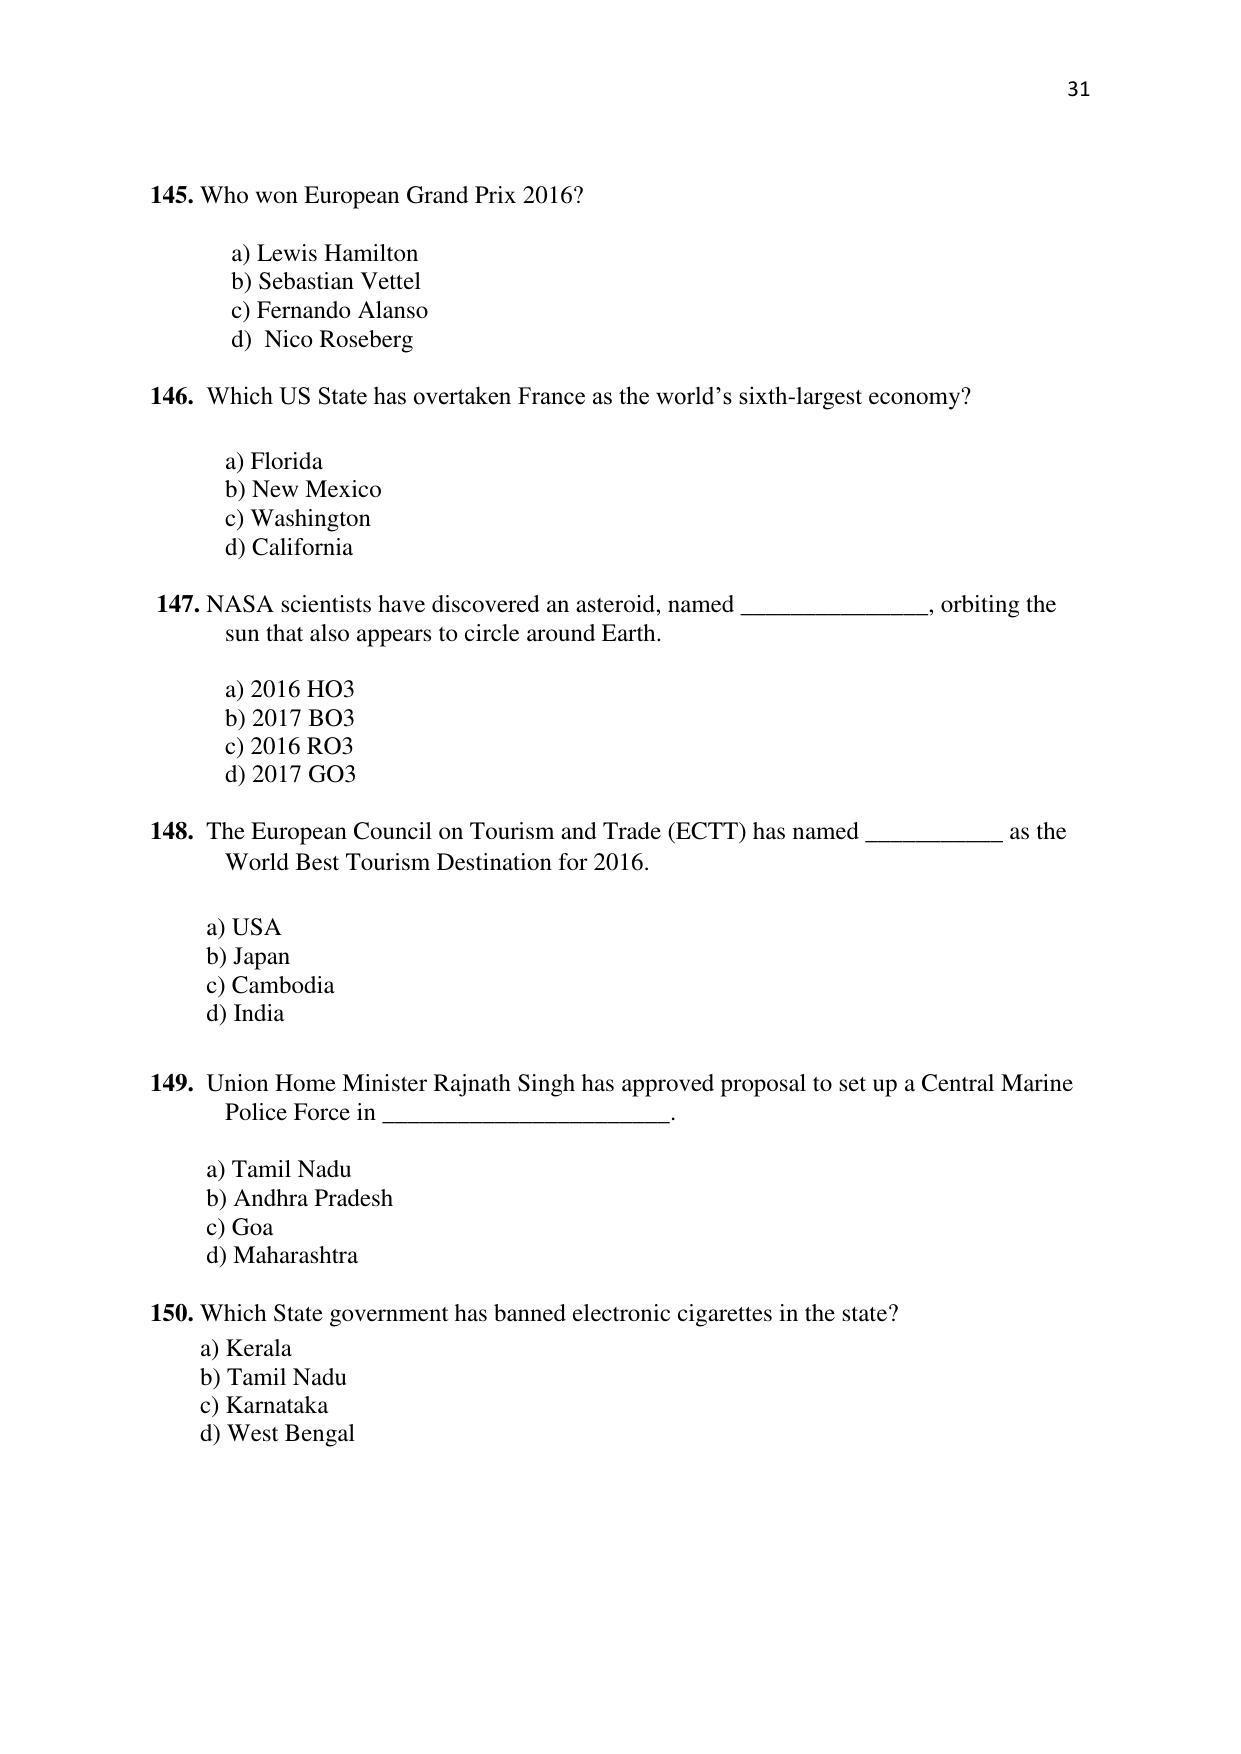 KMAT Question Papers - November 2016 - Page 31